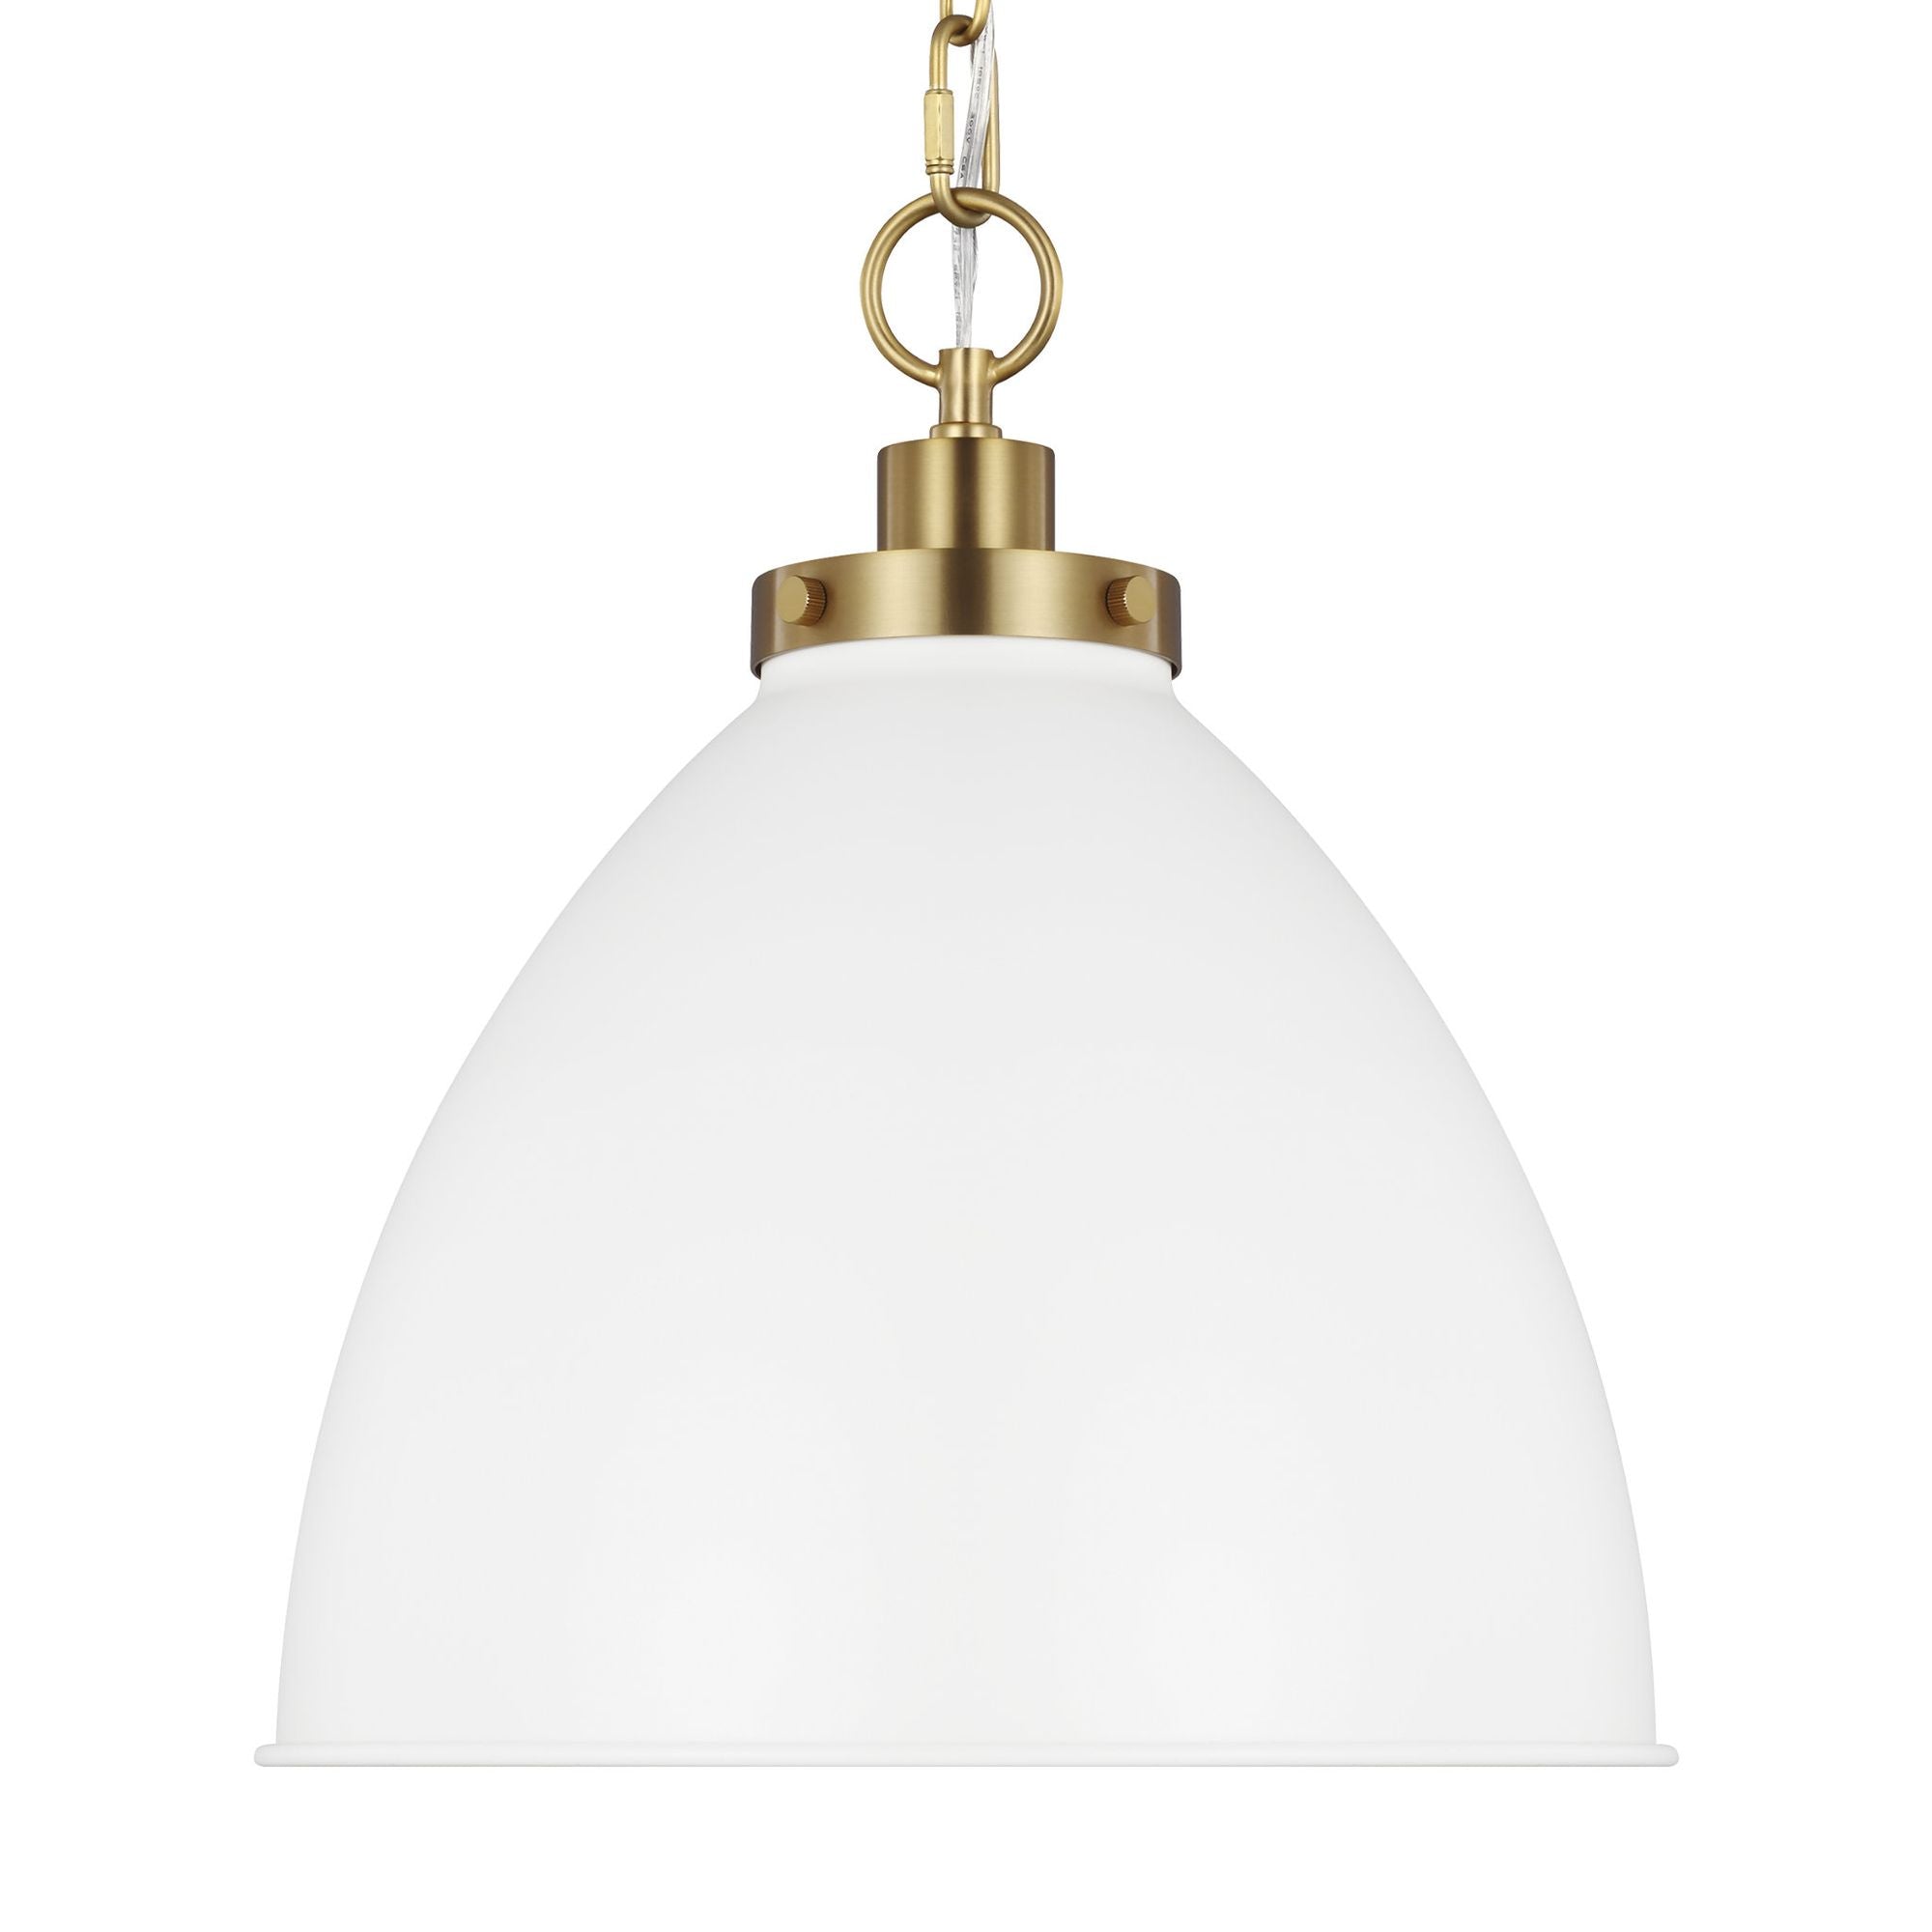 Chapman & Myers Wellfleet Medium Dome Pendant in Matte White and Burnished Brass